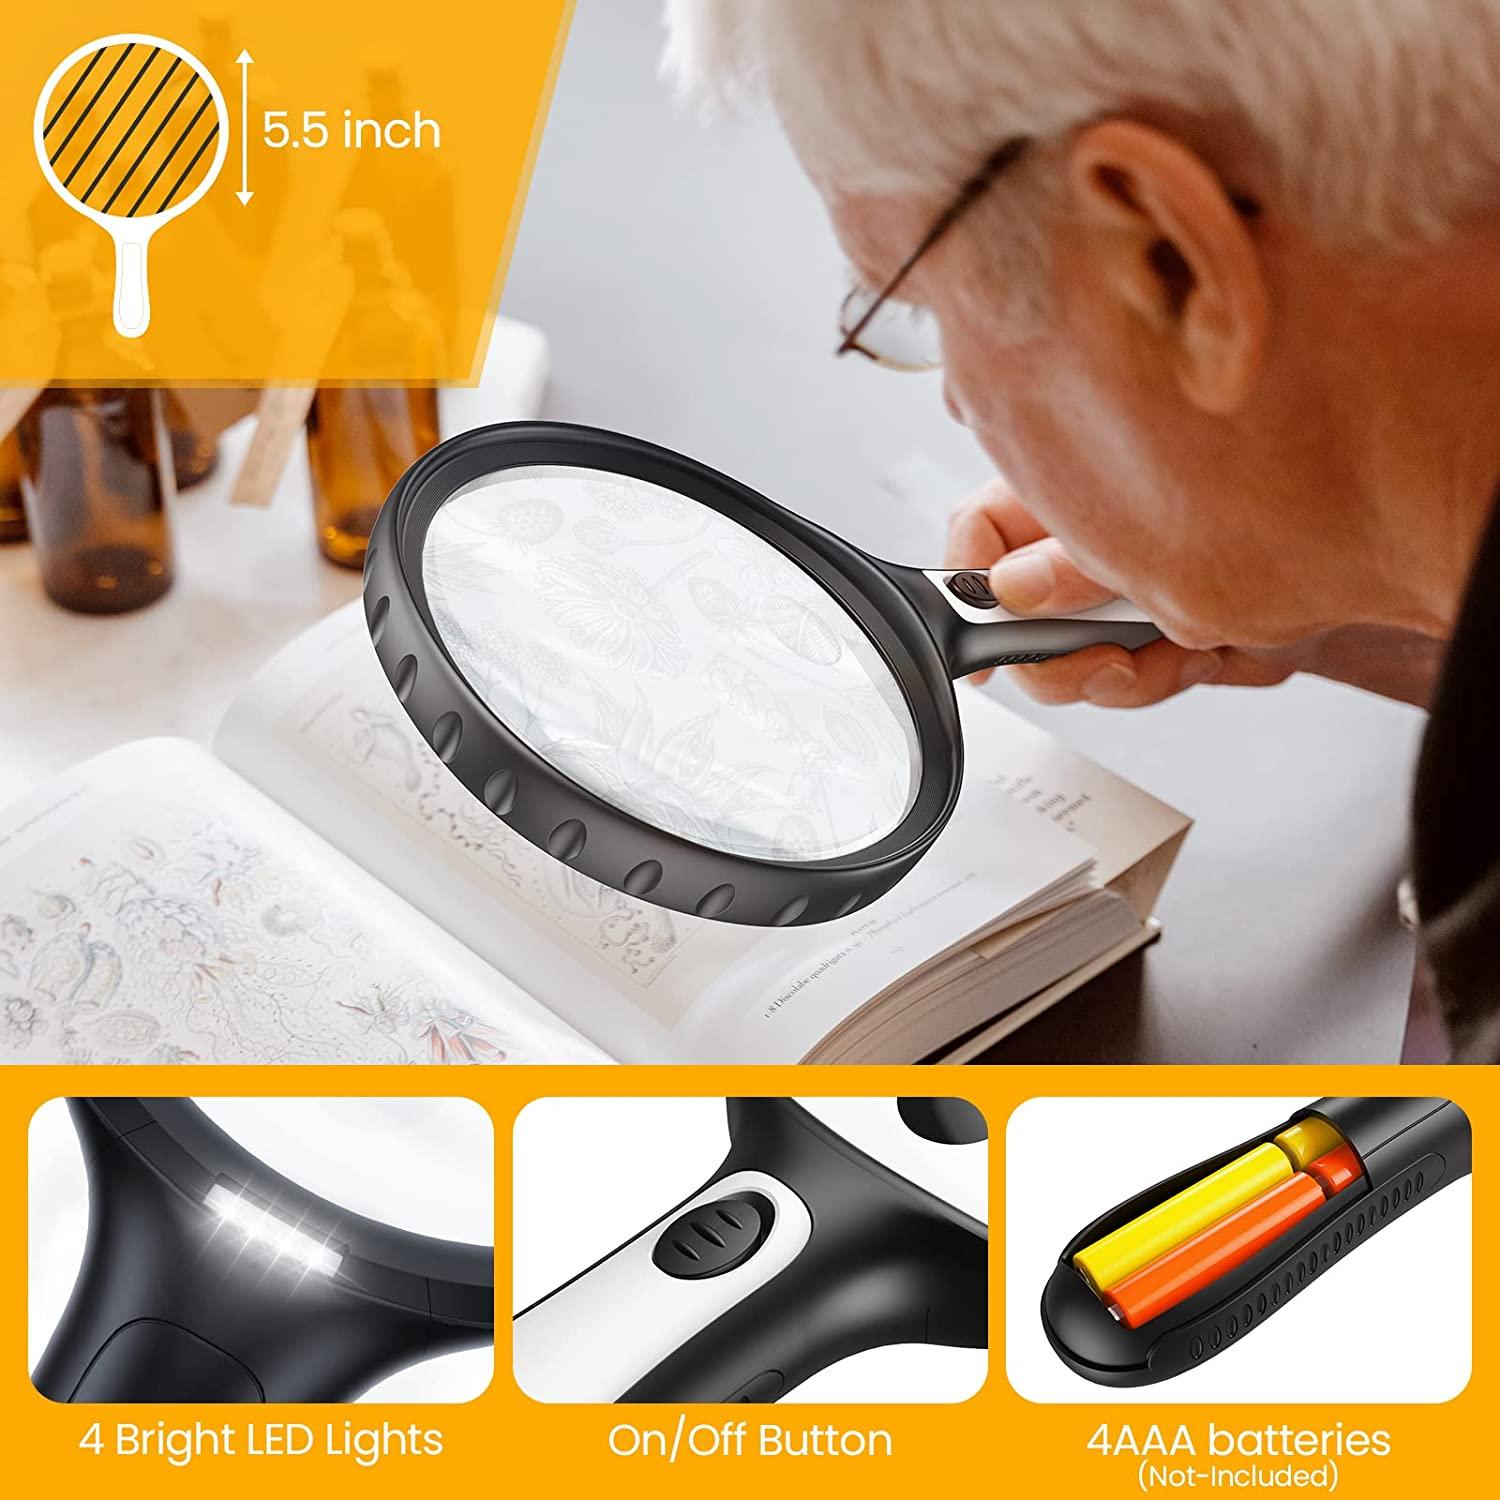 ANBULL 5X 15X Magnifying Glass with Lights, 5.5in Large Handheld Page  Magnifier, Lighted Magnifying Glass for Reading, Small Prints, Low Vision  Seniors (Black)